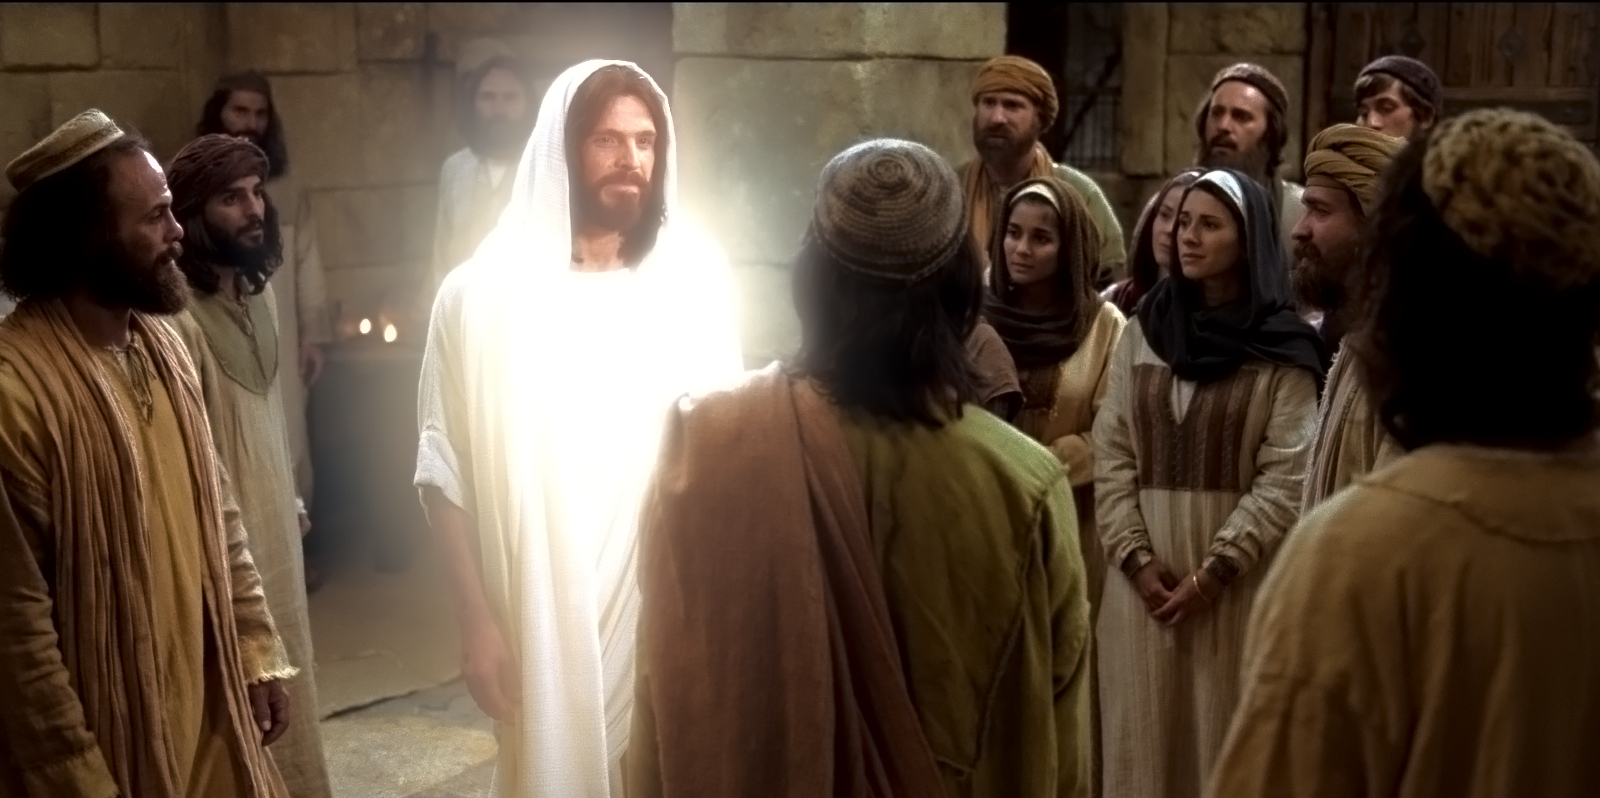 Image result for image of jesus appearing to the disciples